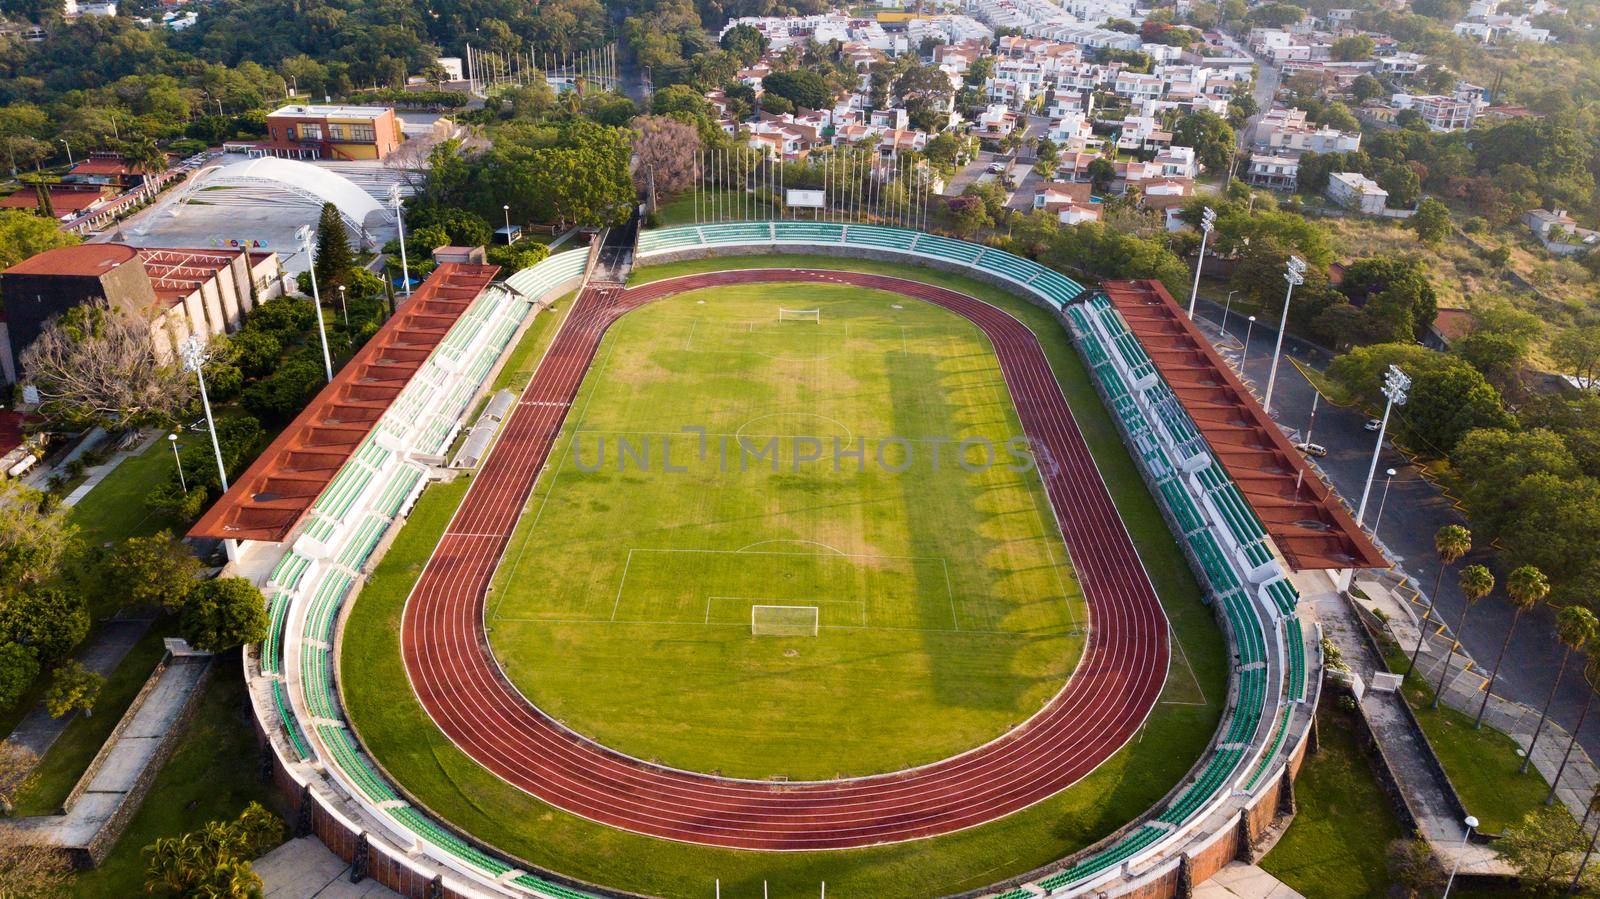 Beautiful aerial view of running track around soccer field with small town and trees as background. Peaceful view of small college stadium surrounded by houses and green foliage. Athletics and sports